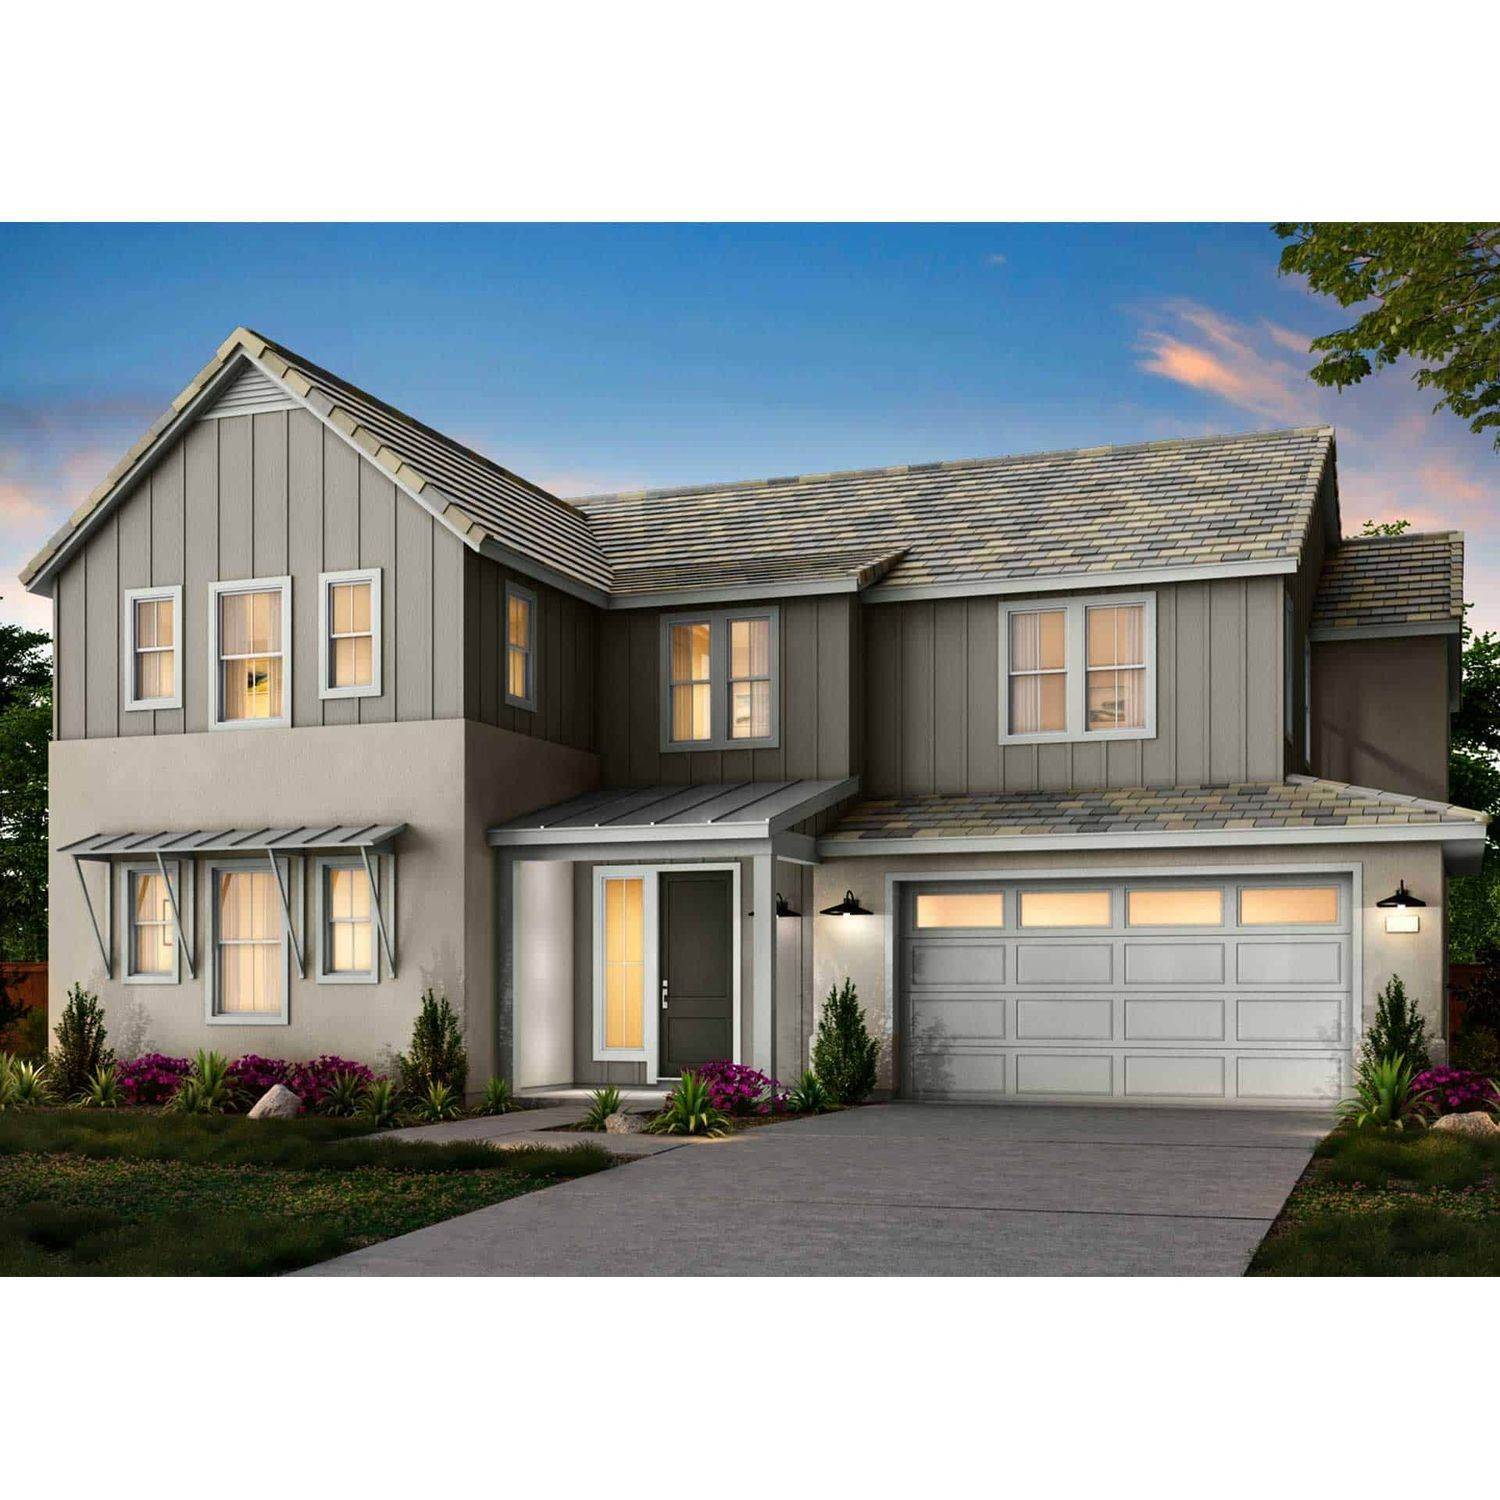 11. The Cove at River Islands building at 2799 Orion Court, Lathrop, CA 95330